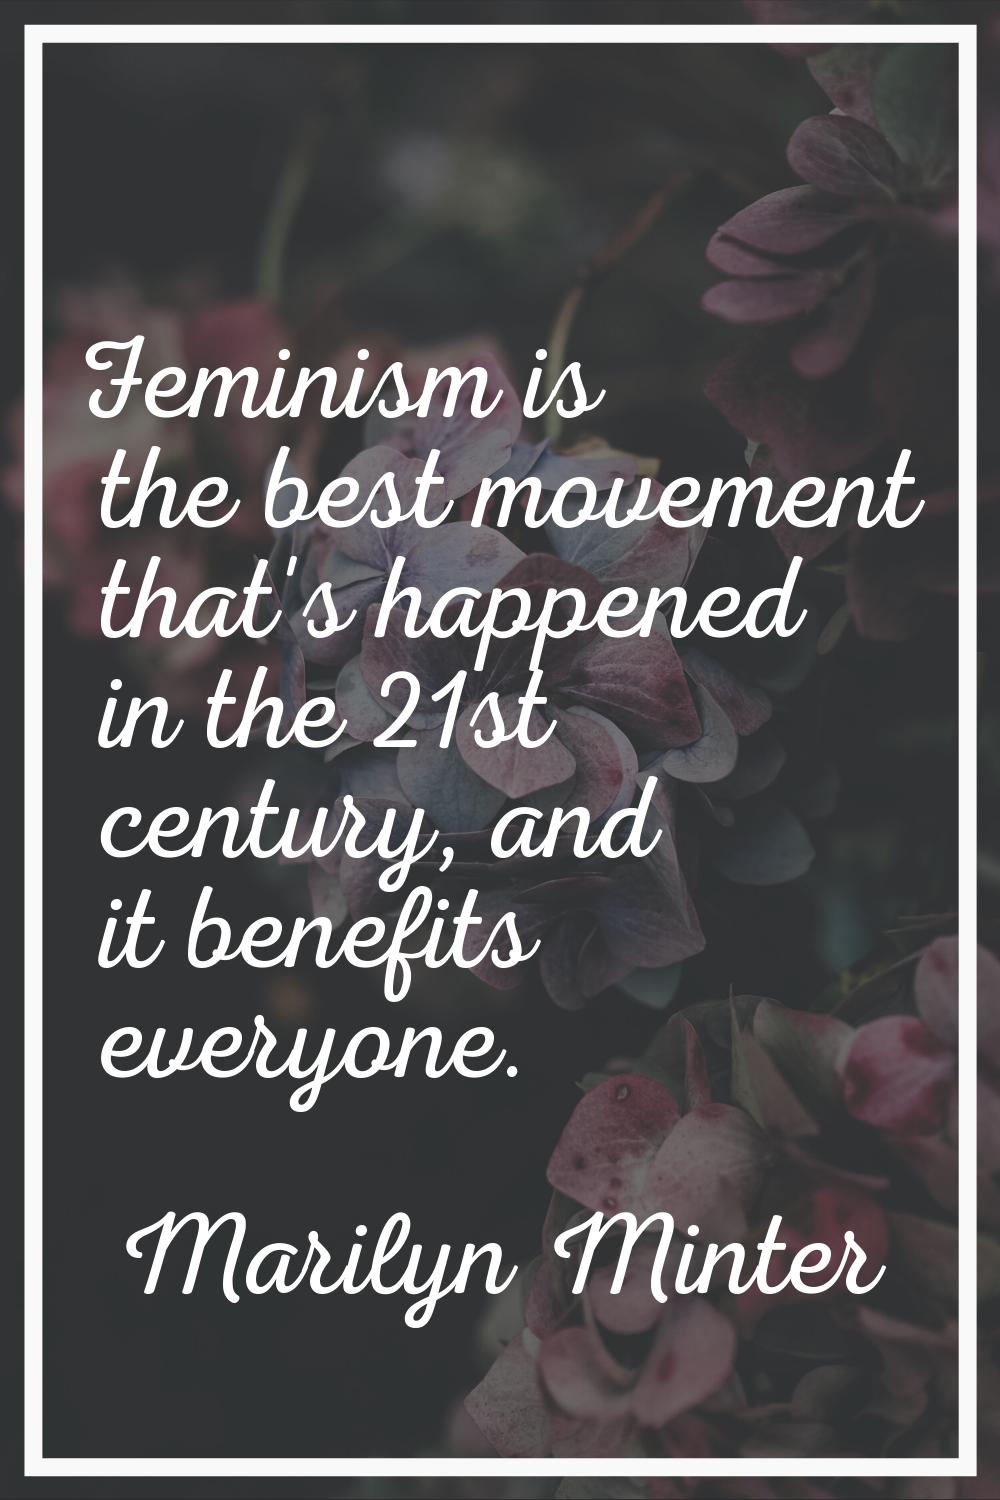 Feminism is the best movement that's happened in the 21st century, and it benefits everyone.